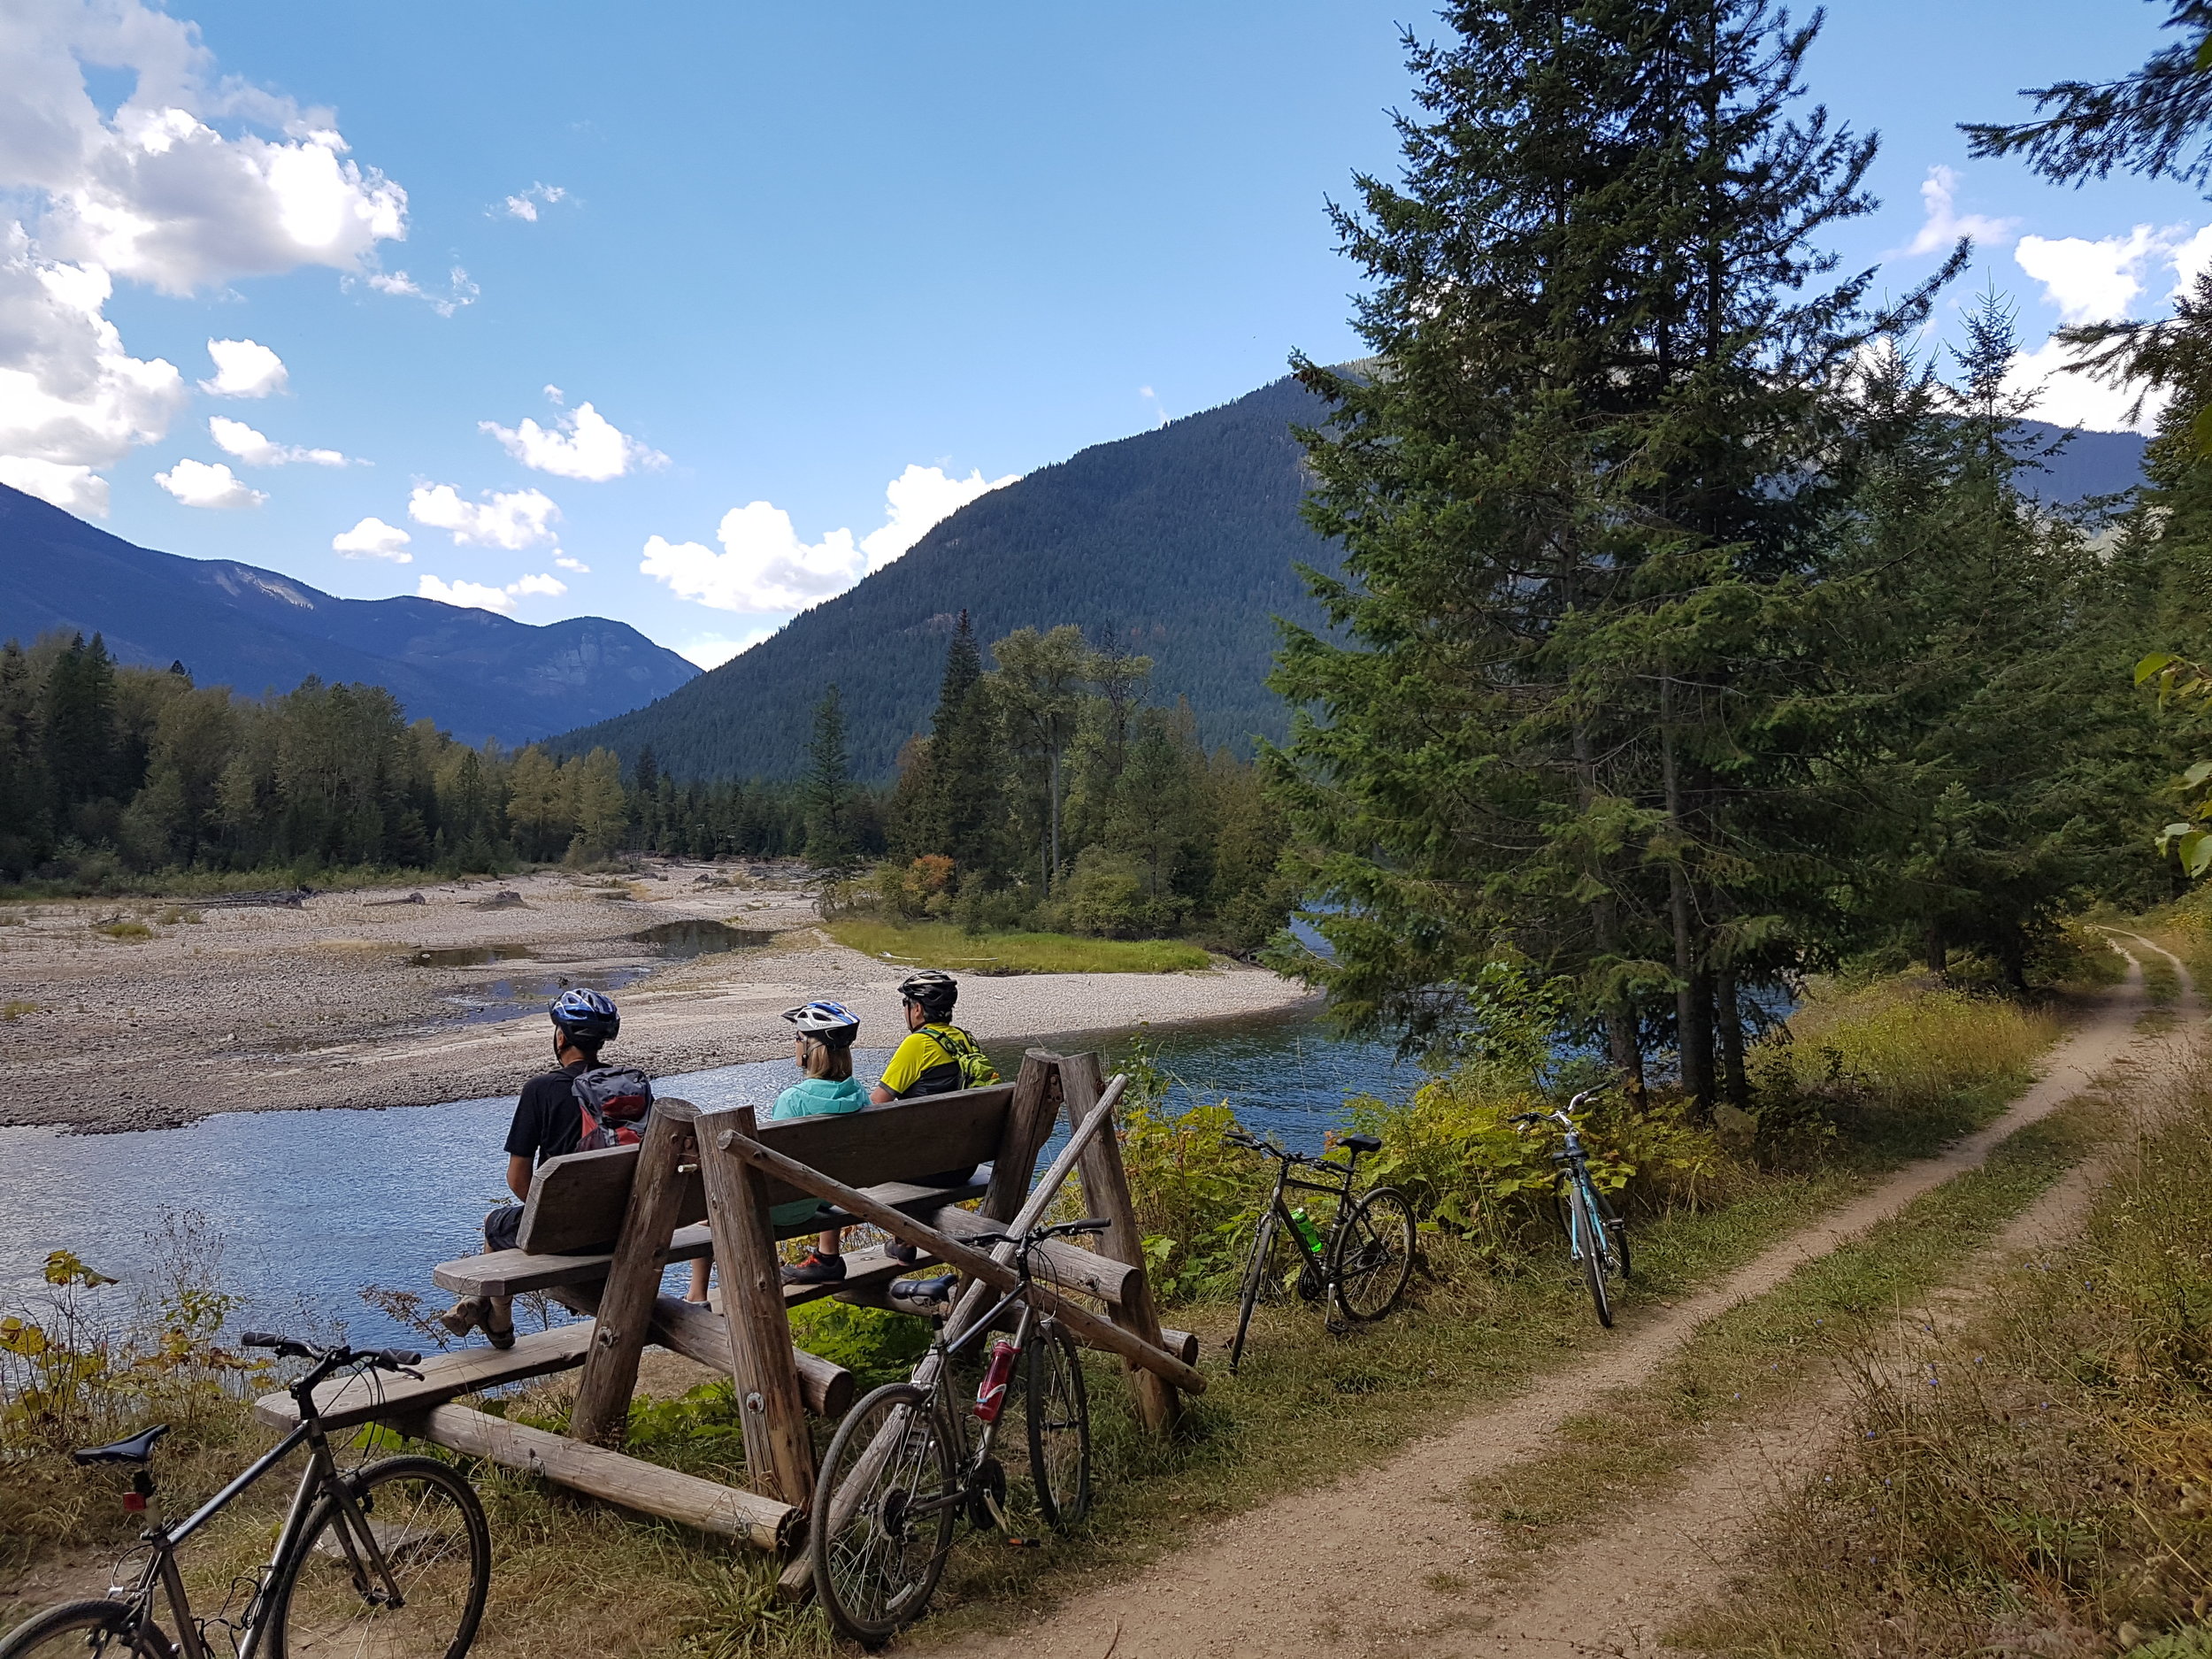 Rest stop during our multiday bike tour in BC